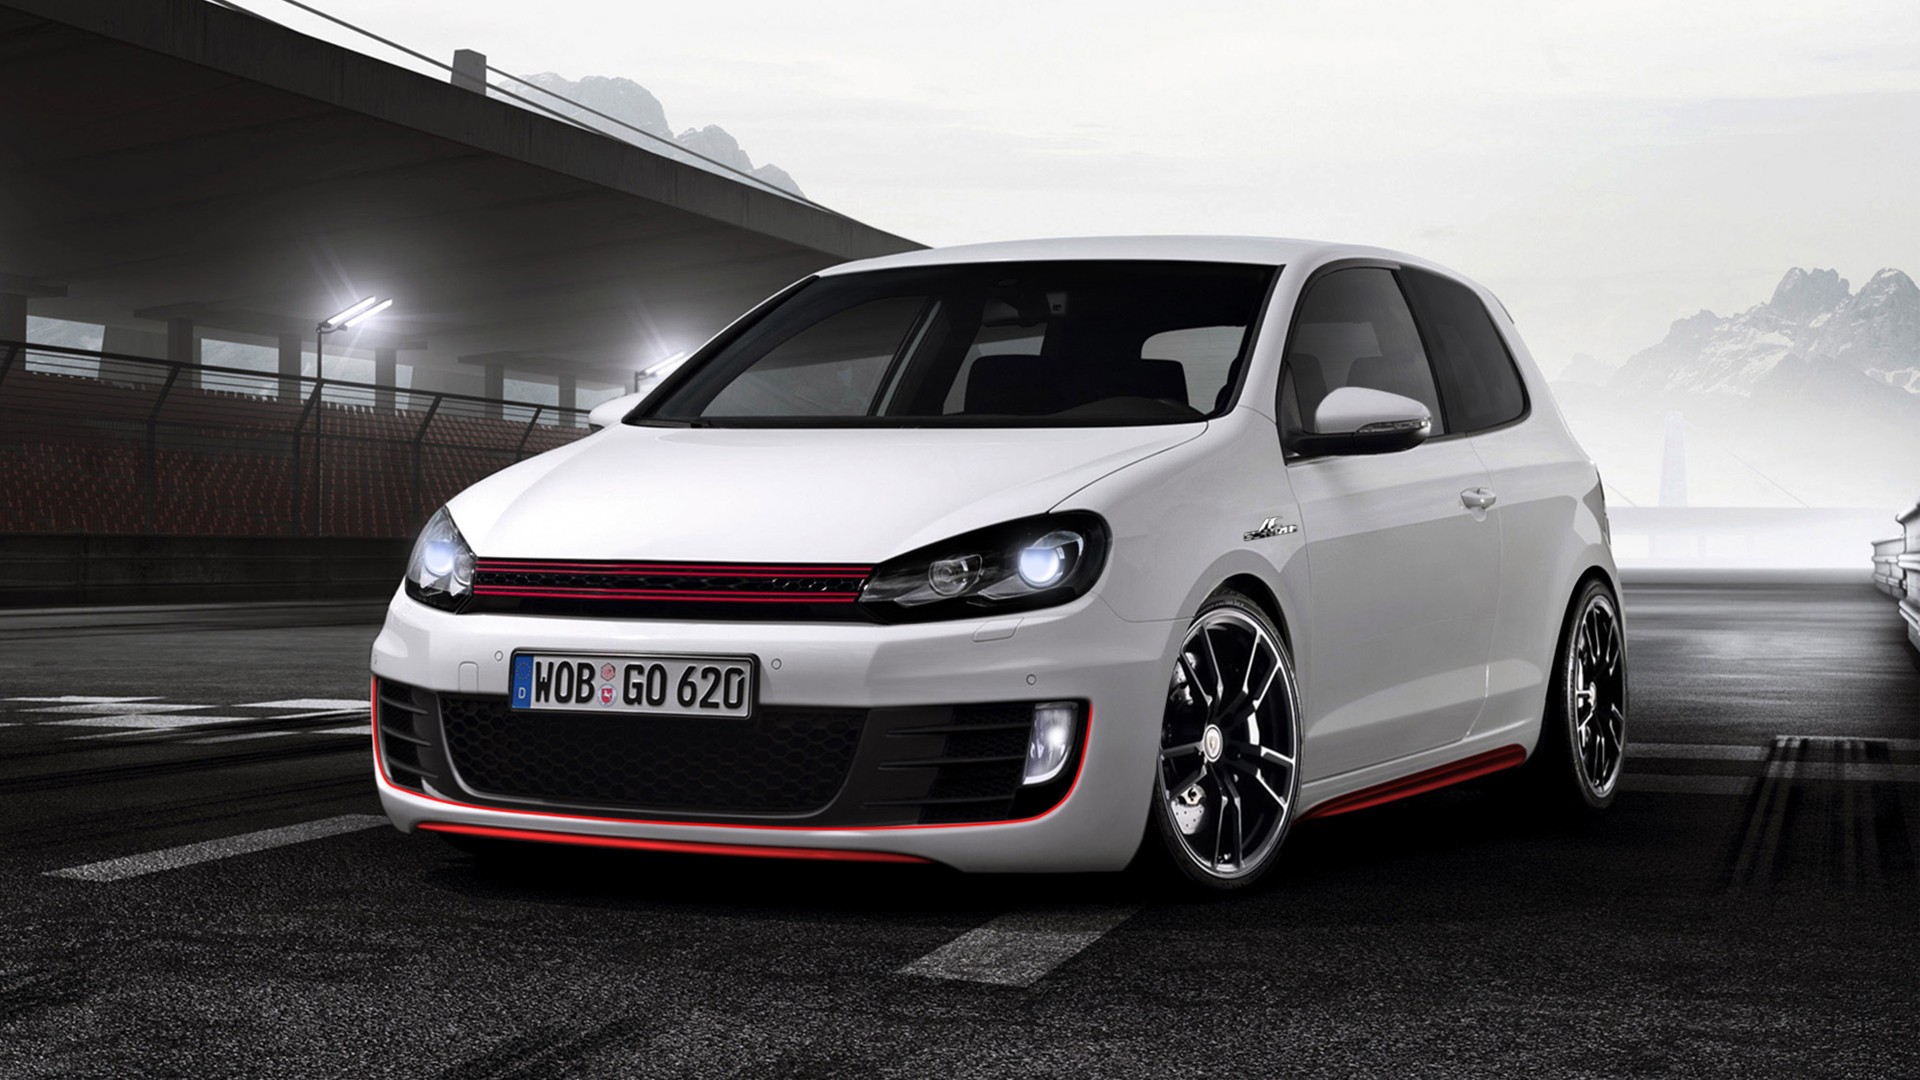 Wallpapers Vw Golf Gti Pictures toon Pinterest